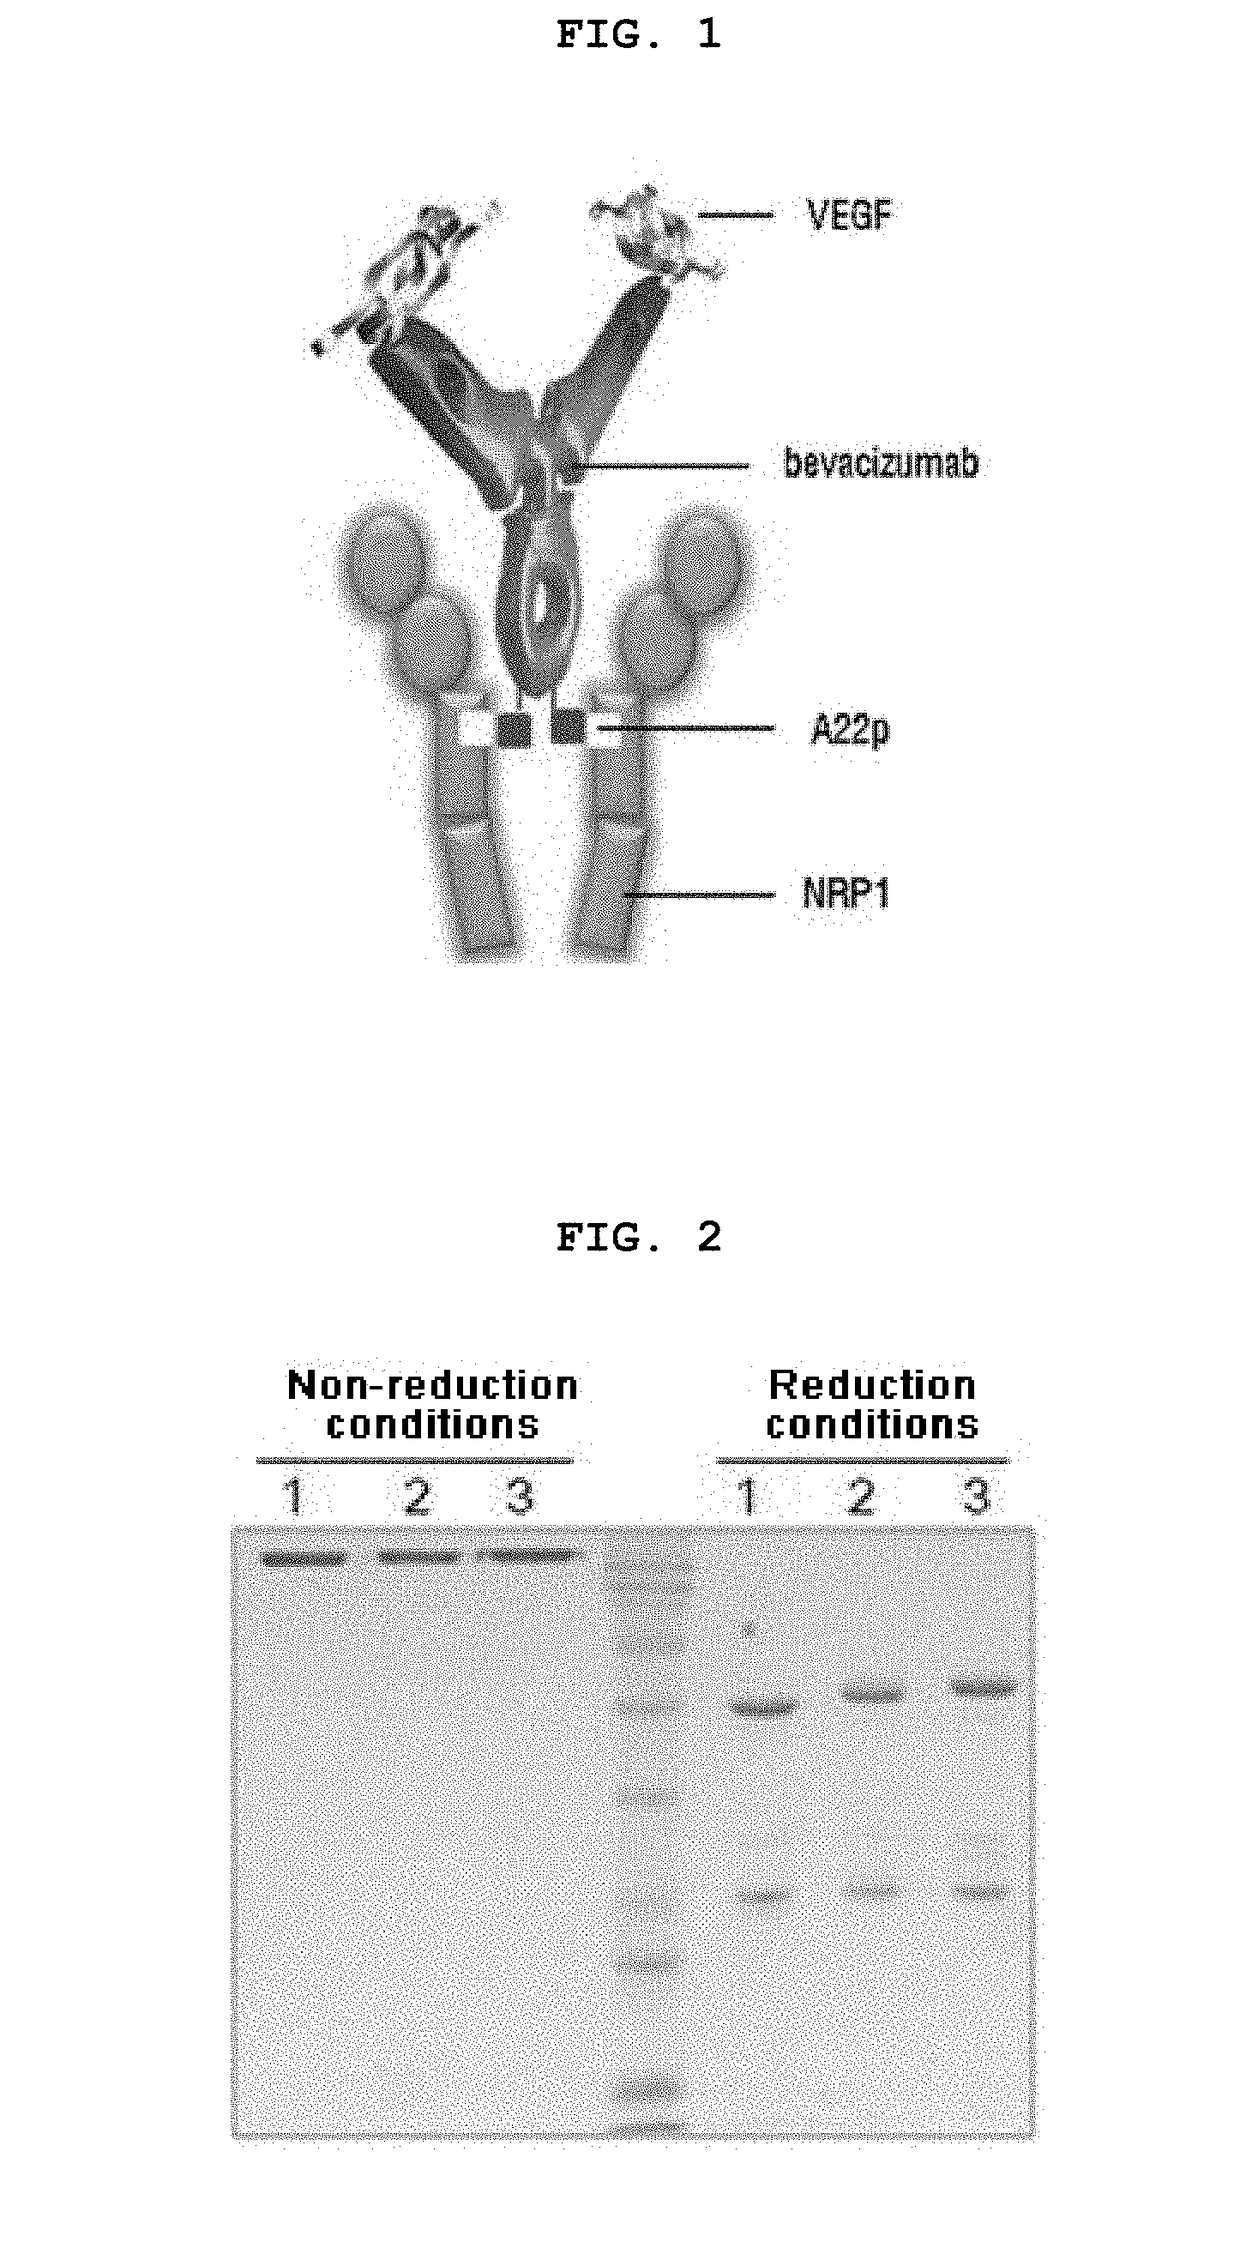 Pharmaceutical composition containing, as active ingredient, fusion protein in which tumor-penetrating peptide and Anti-angiogenesis agent are fused, for preventing and treating cancer or angiogenesis-related diseases